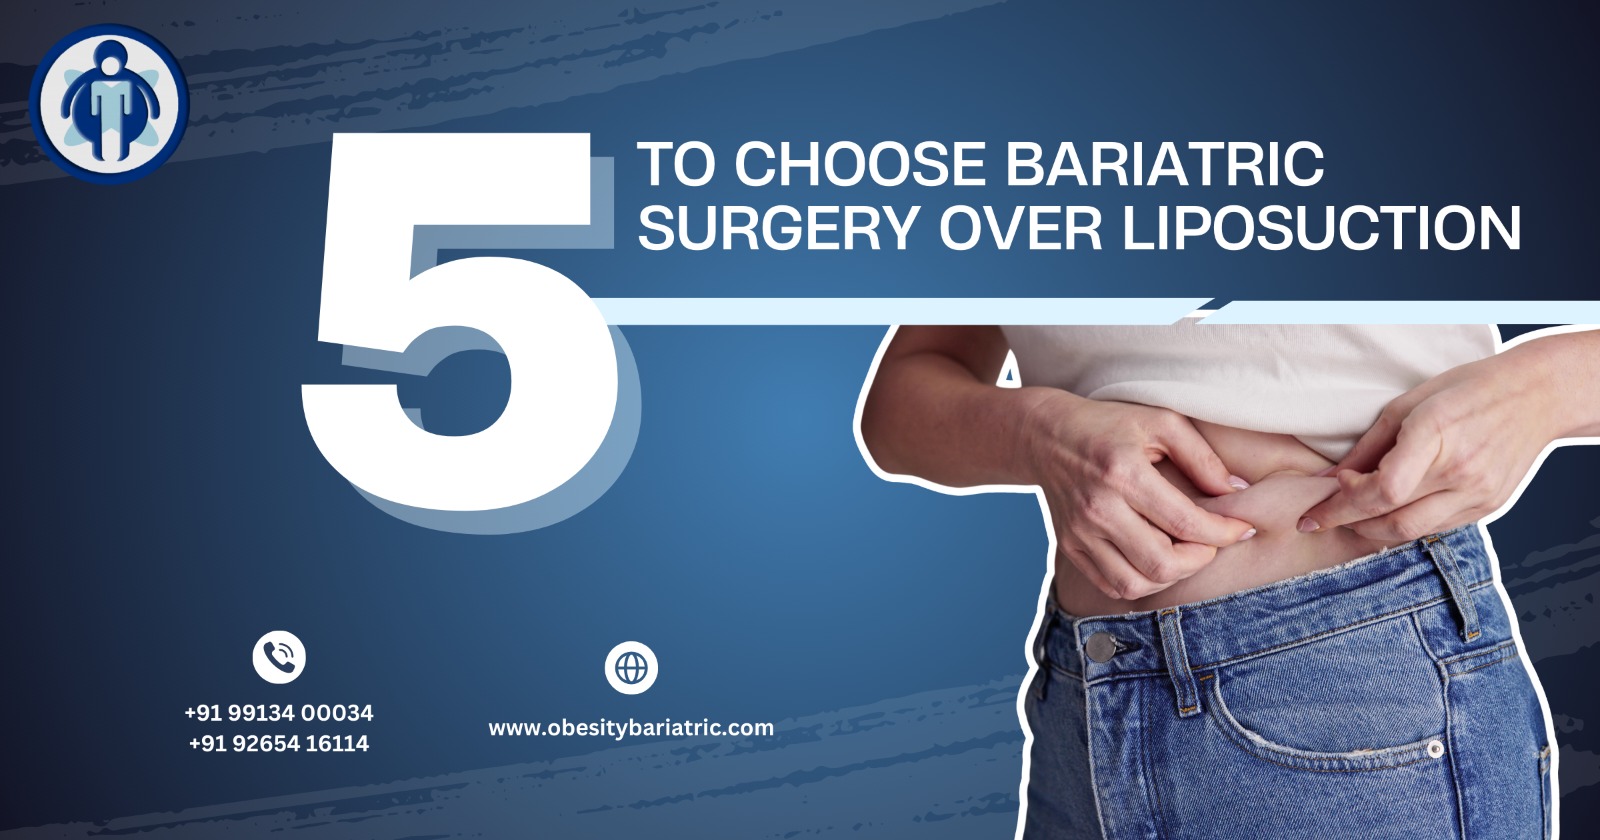 5 Reasons to Choose Bariatric Surgery over Liposuction